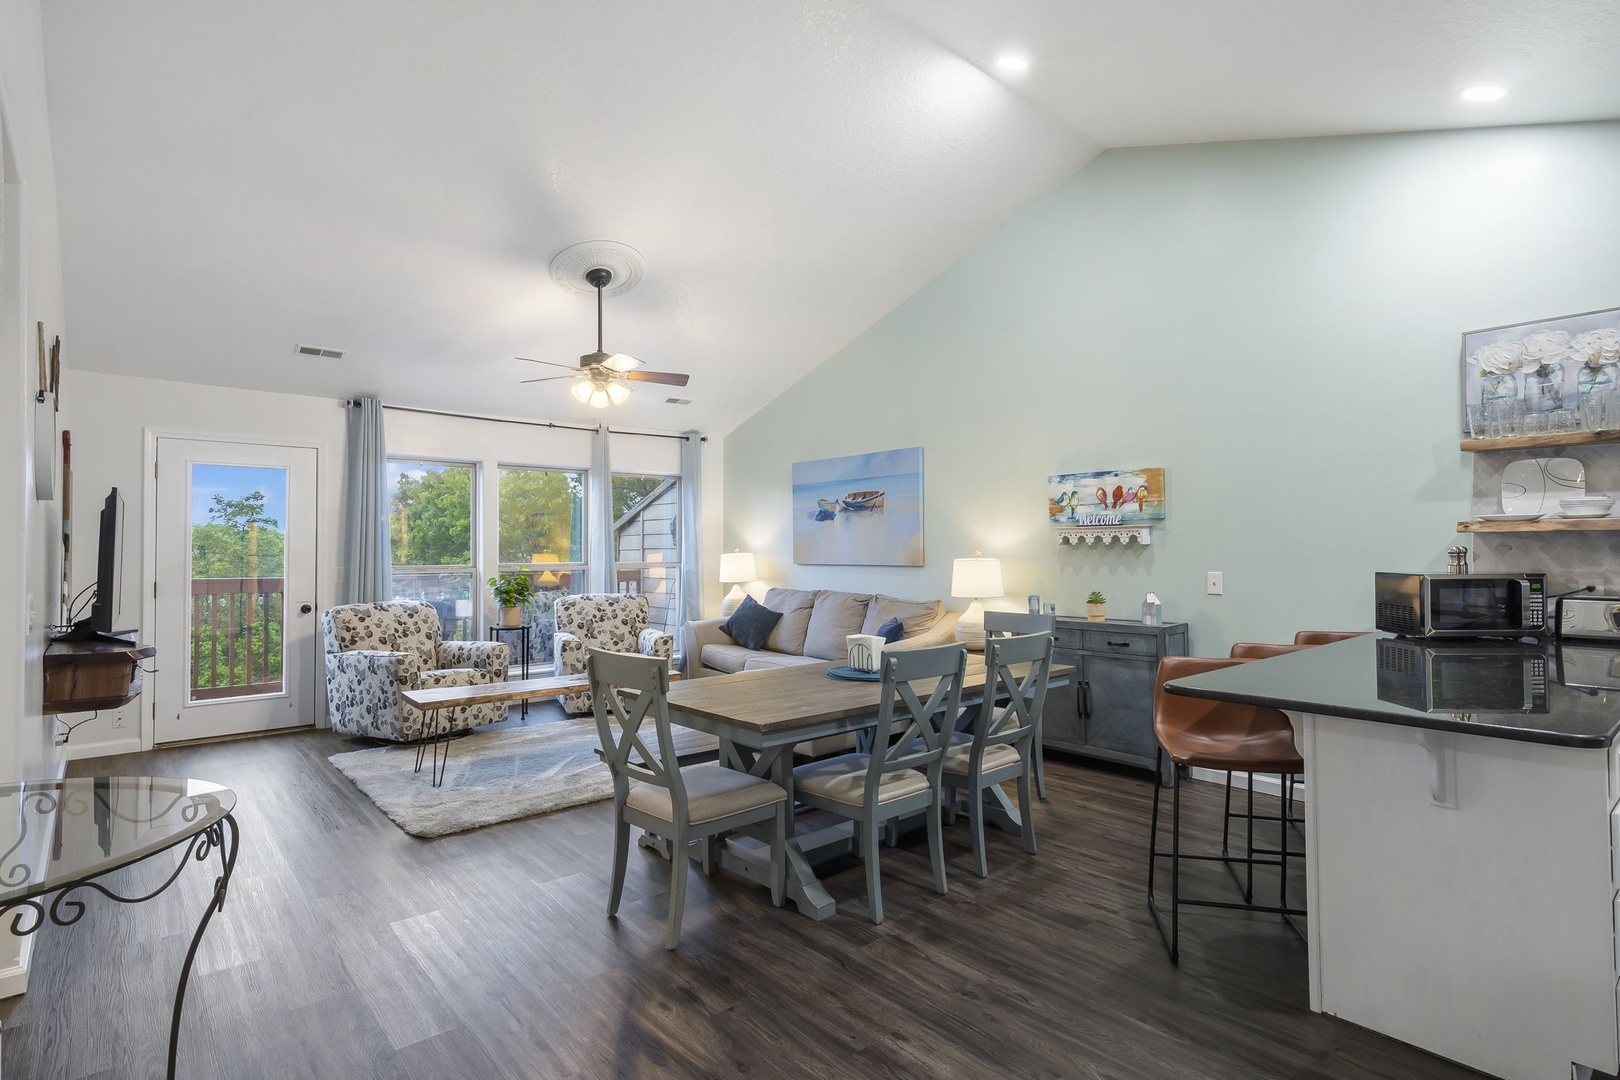 The whole family will love spending time together in the open Living/Dining and Kitchen areas